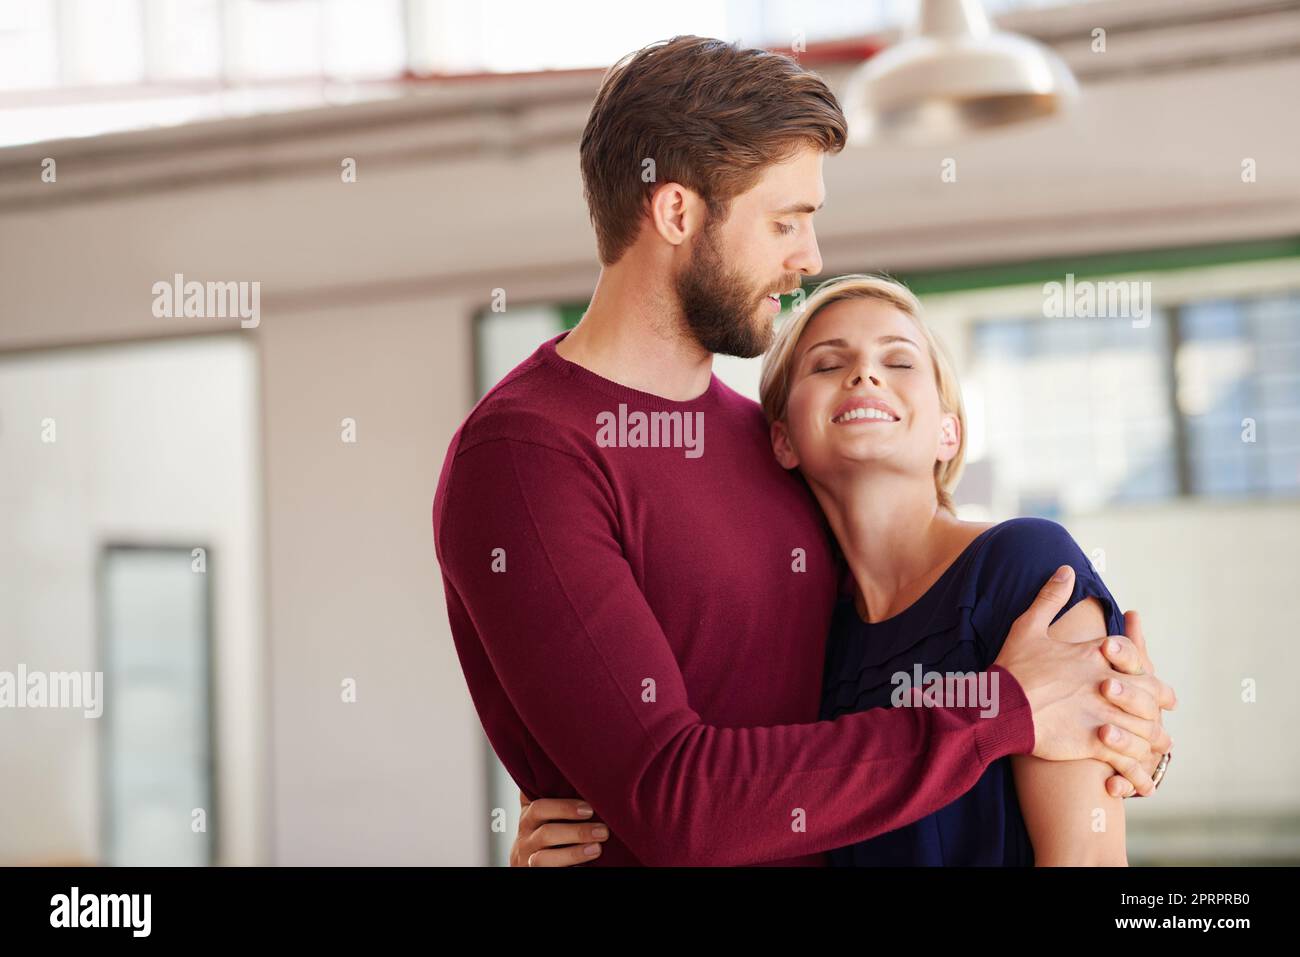 Together in love...and in business. a couple working together in an open office. Stock Photo